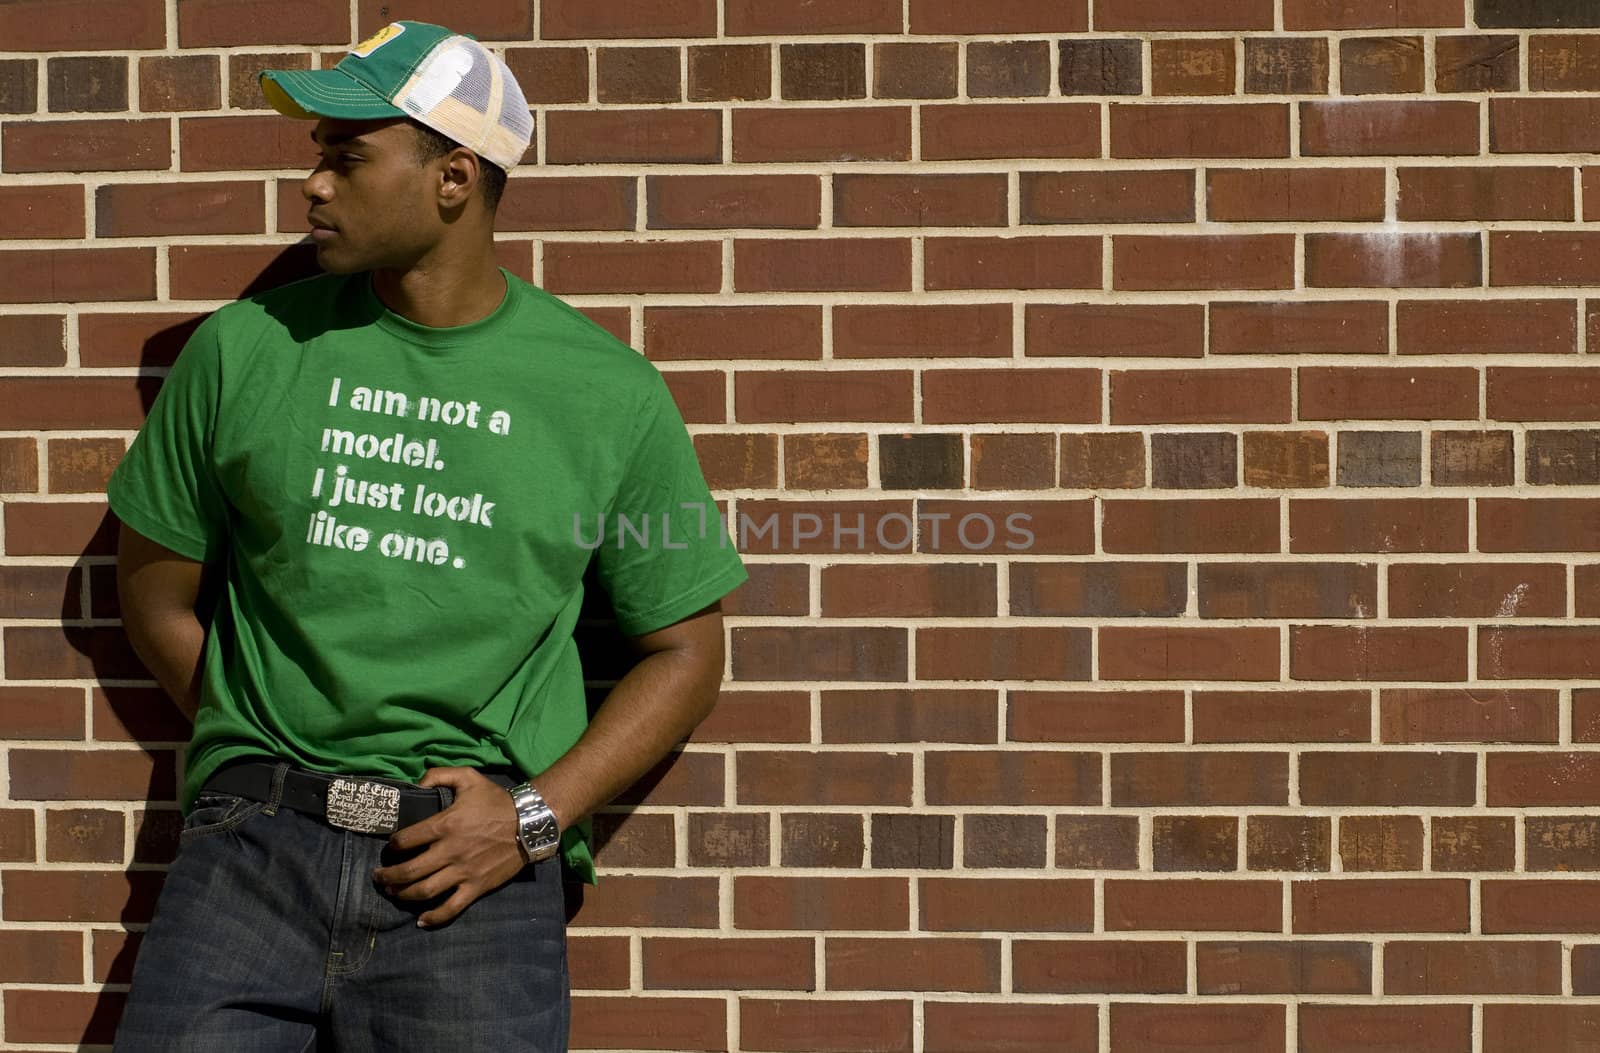 Attractive young African American male playing posing in a green t-shirt and jeans against a brick wall.